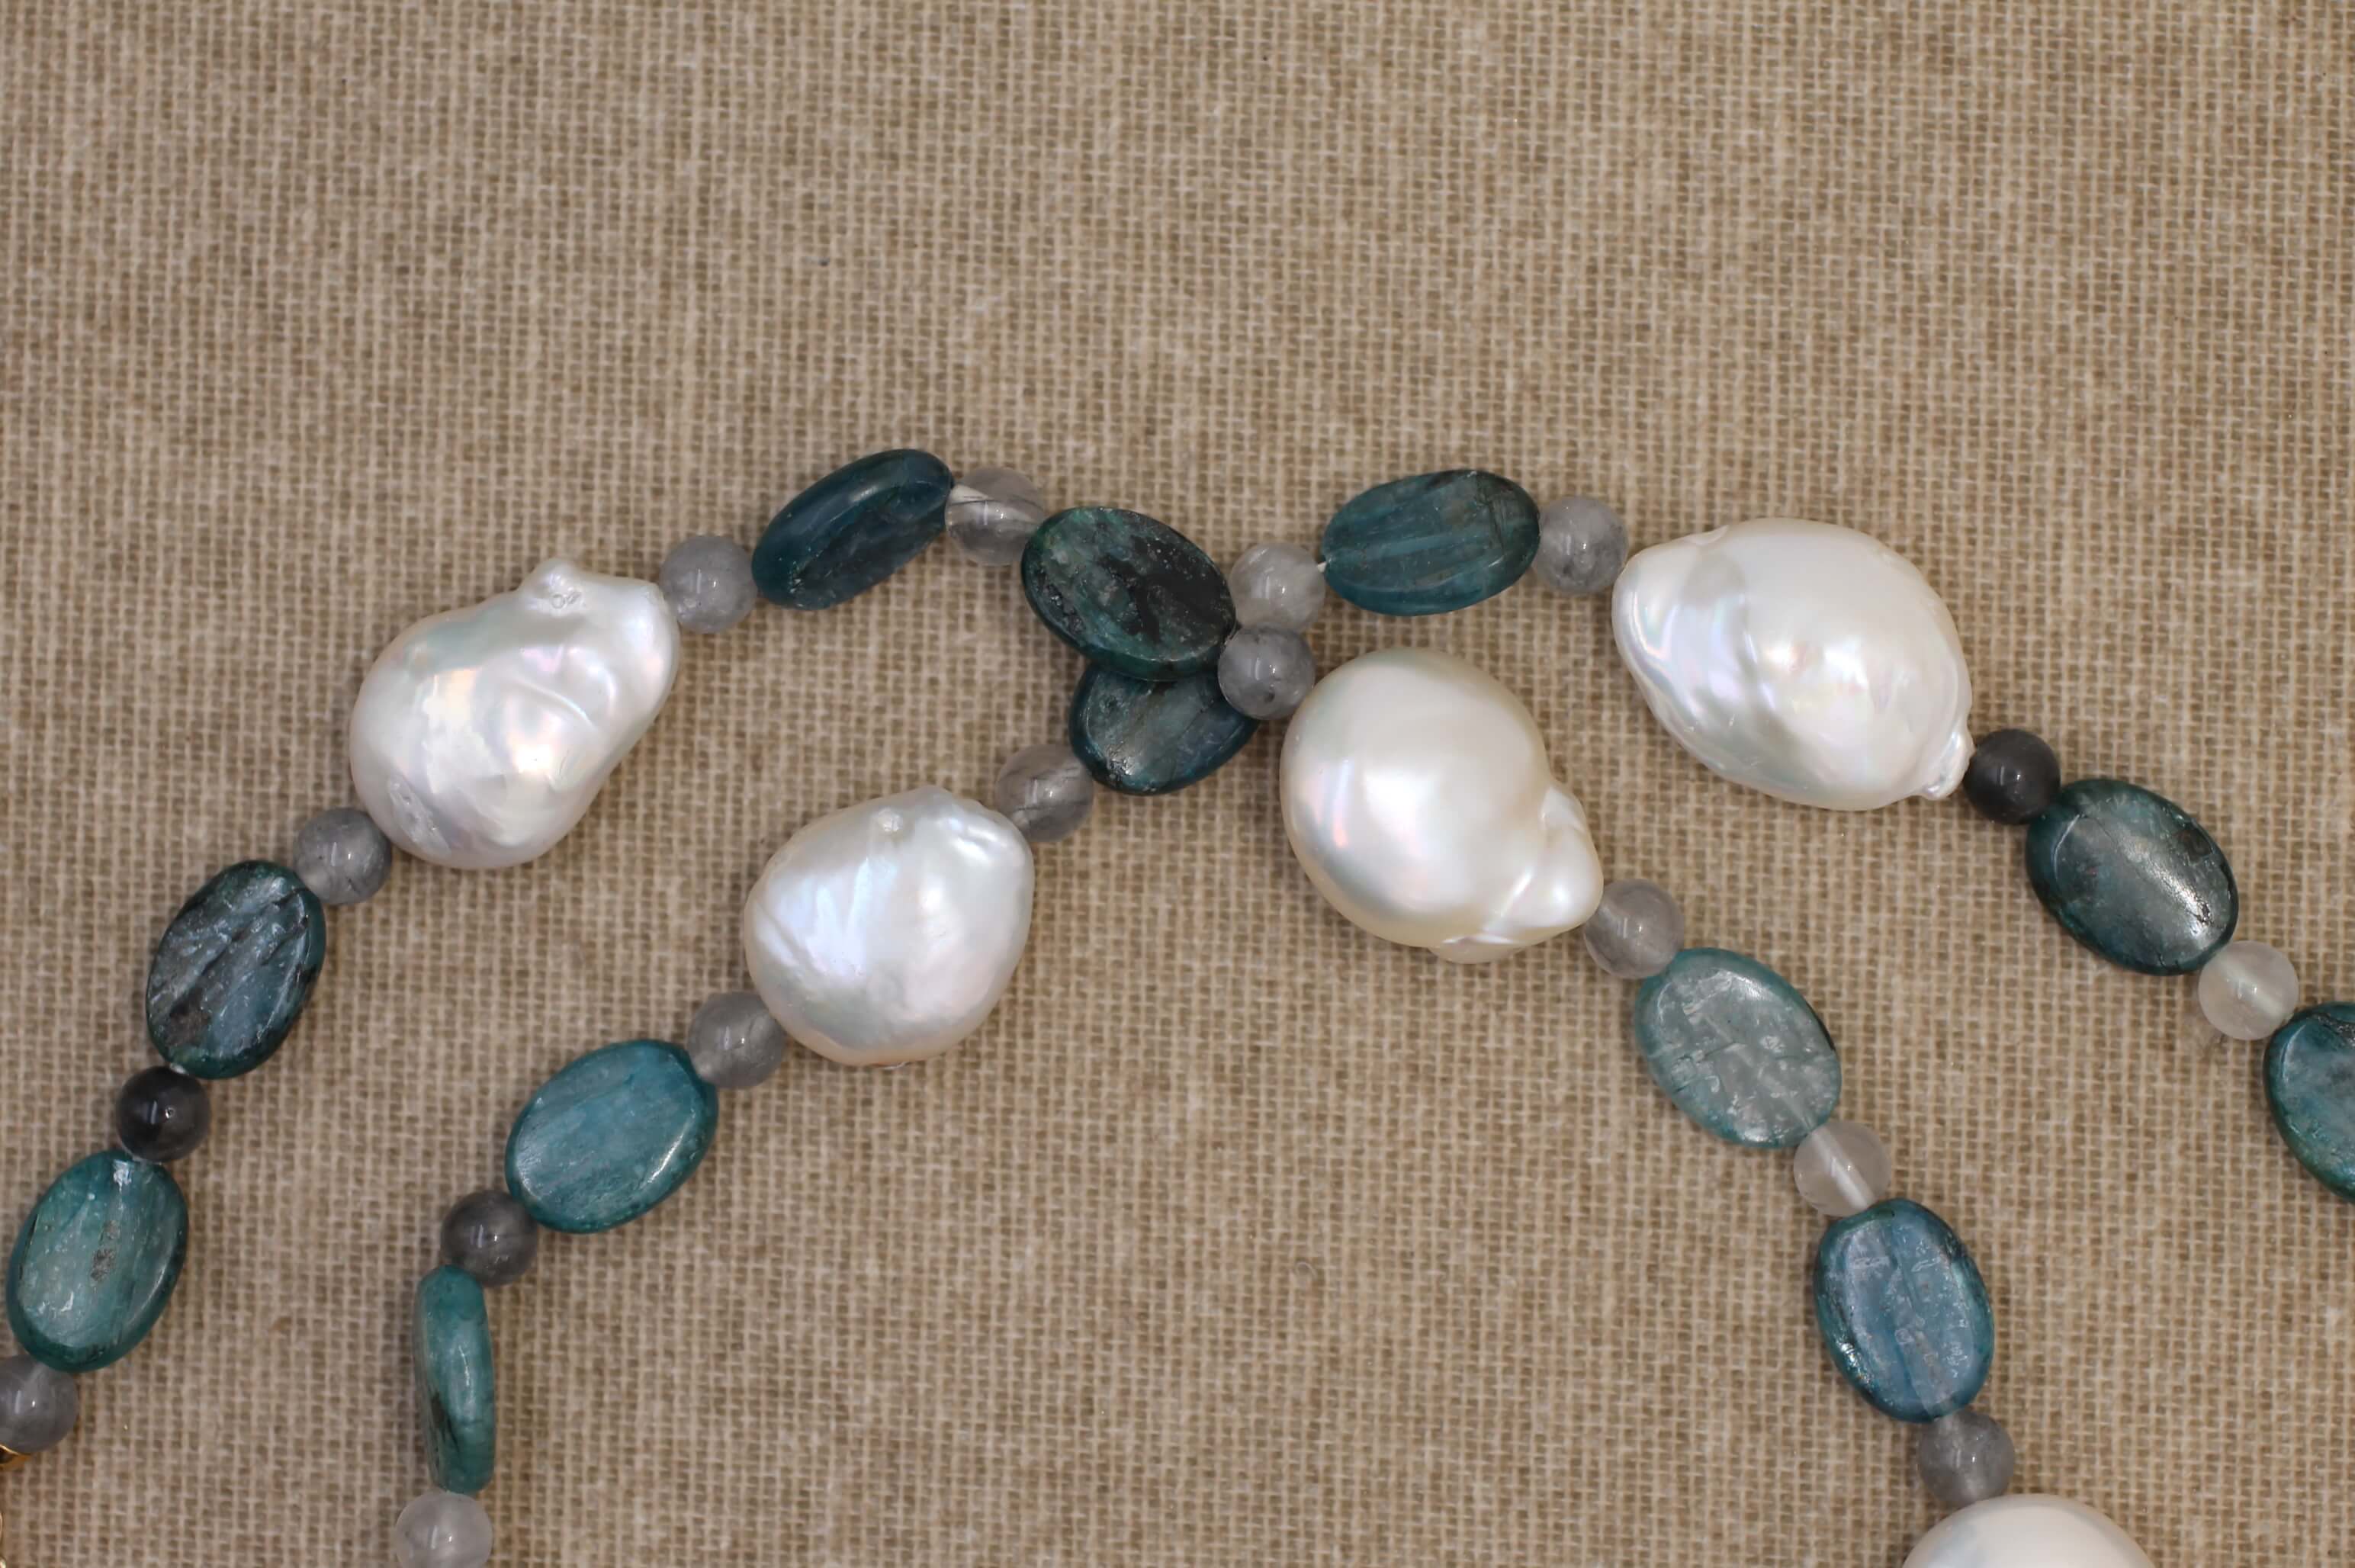 Gold, Kyanite, Quartz and Baroque Pearls necklace